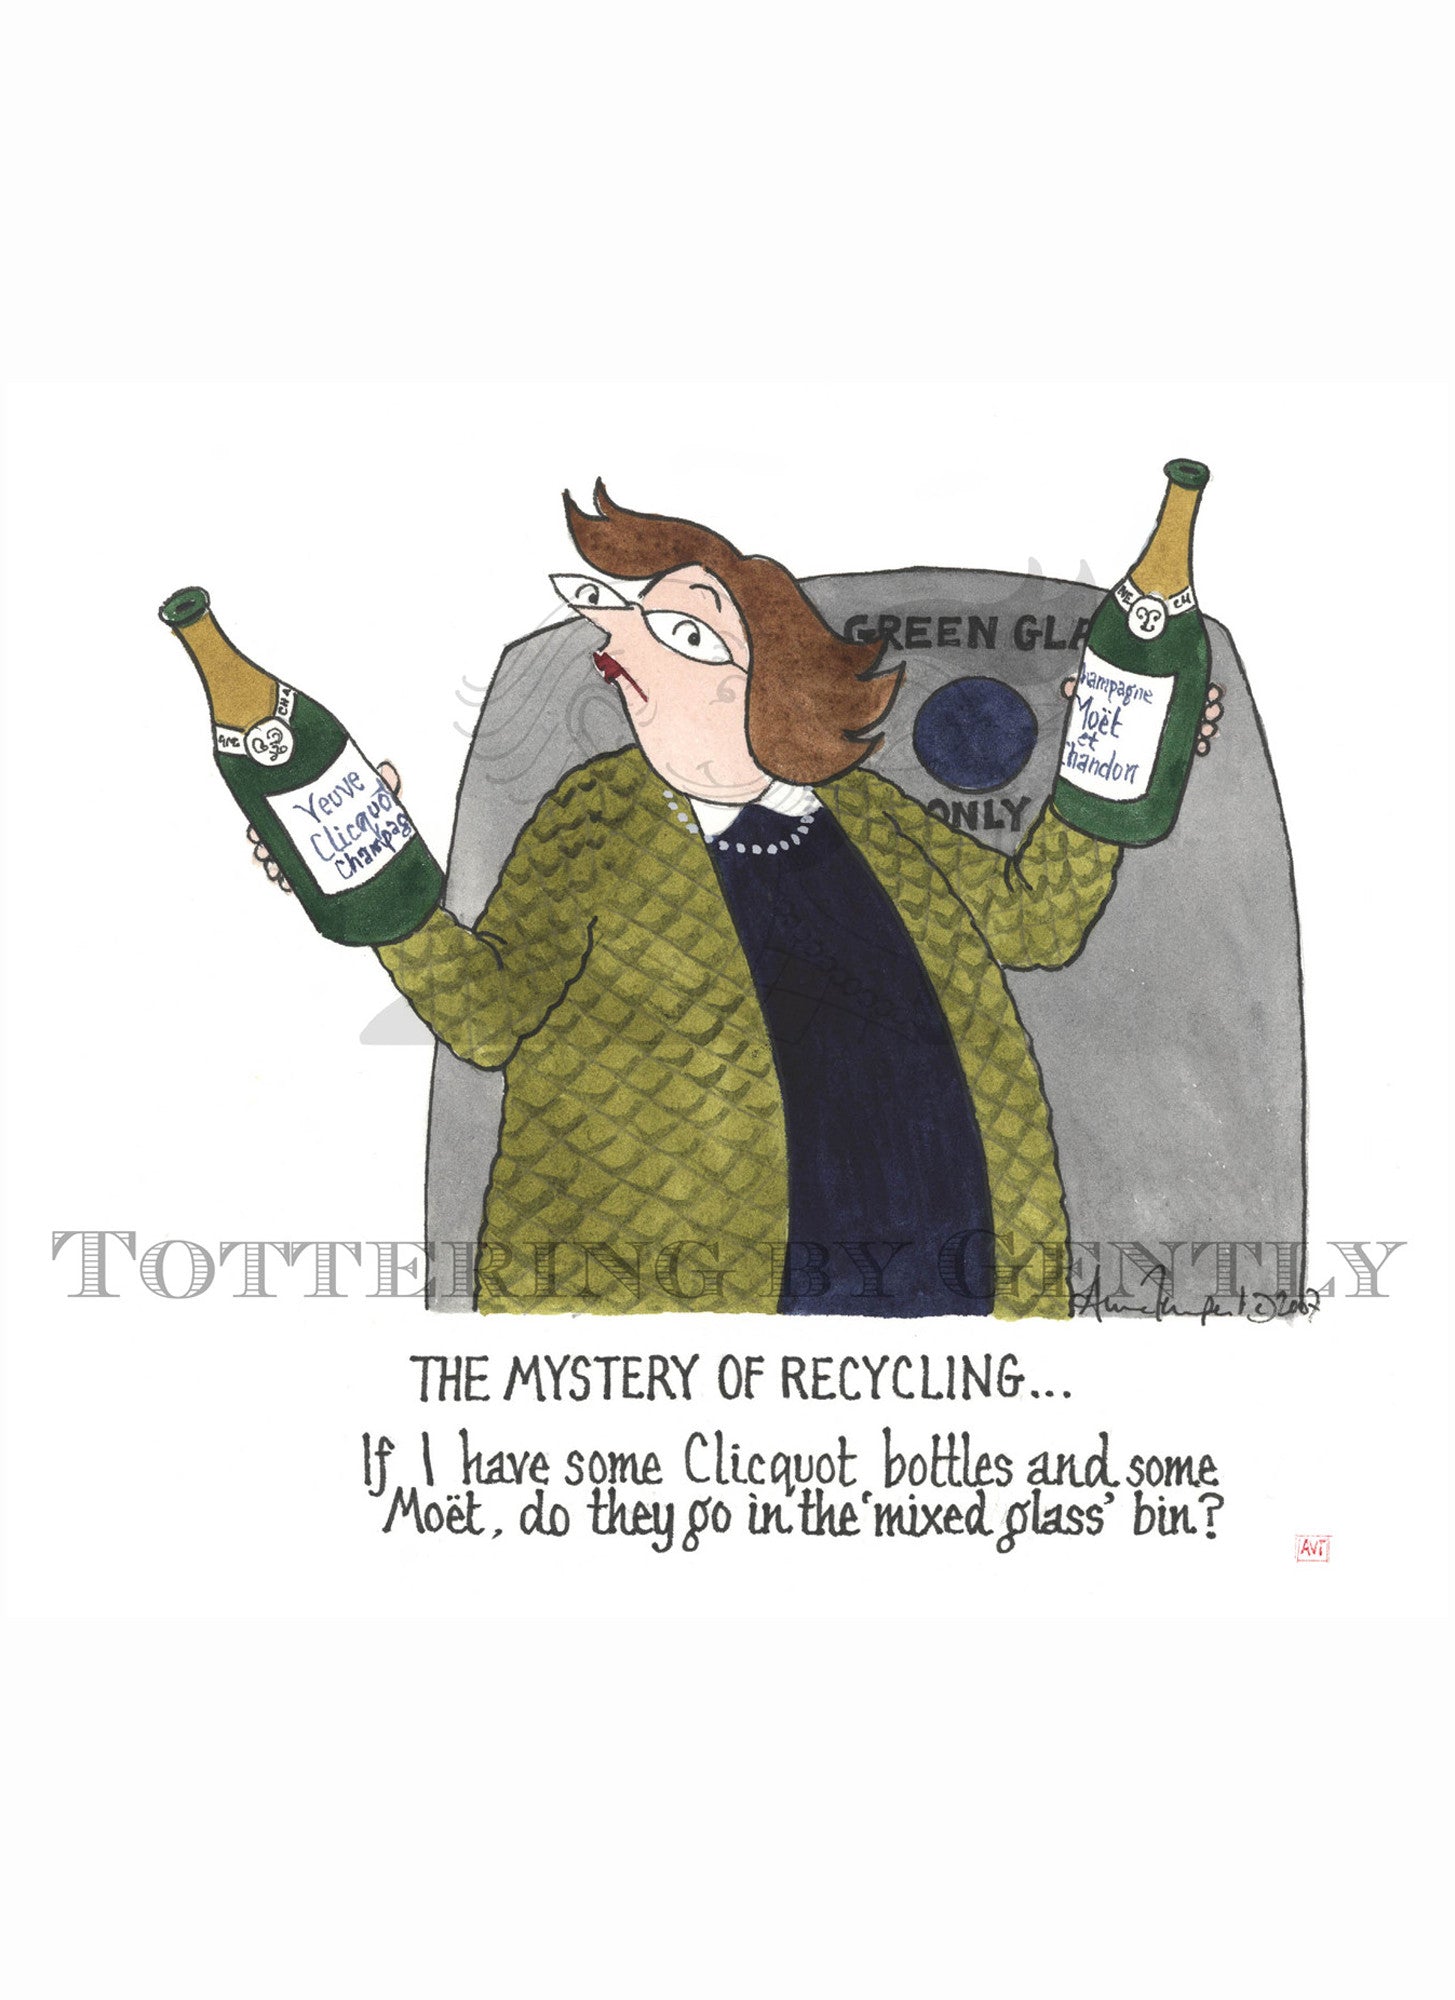 The mystery of recycling...  (S0457)